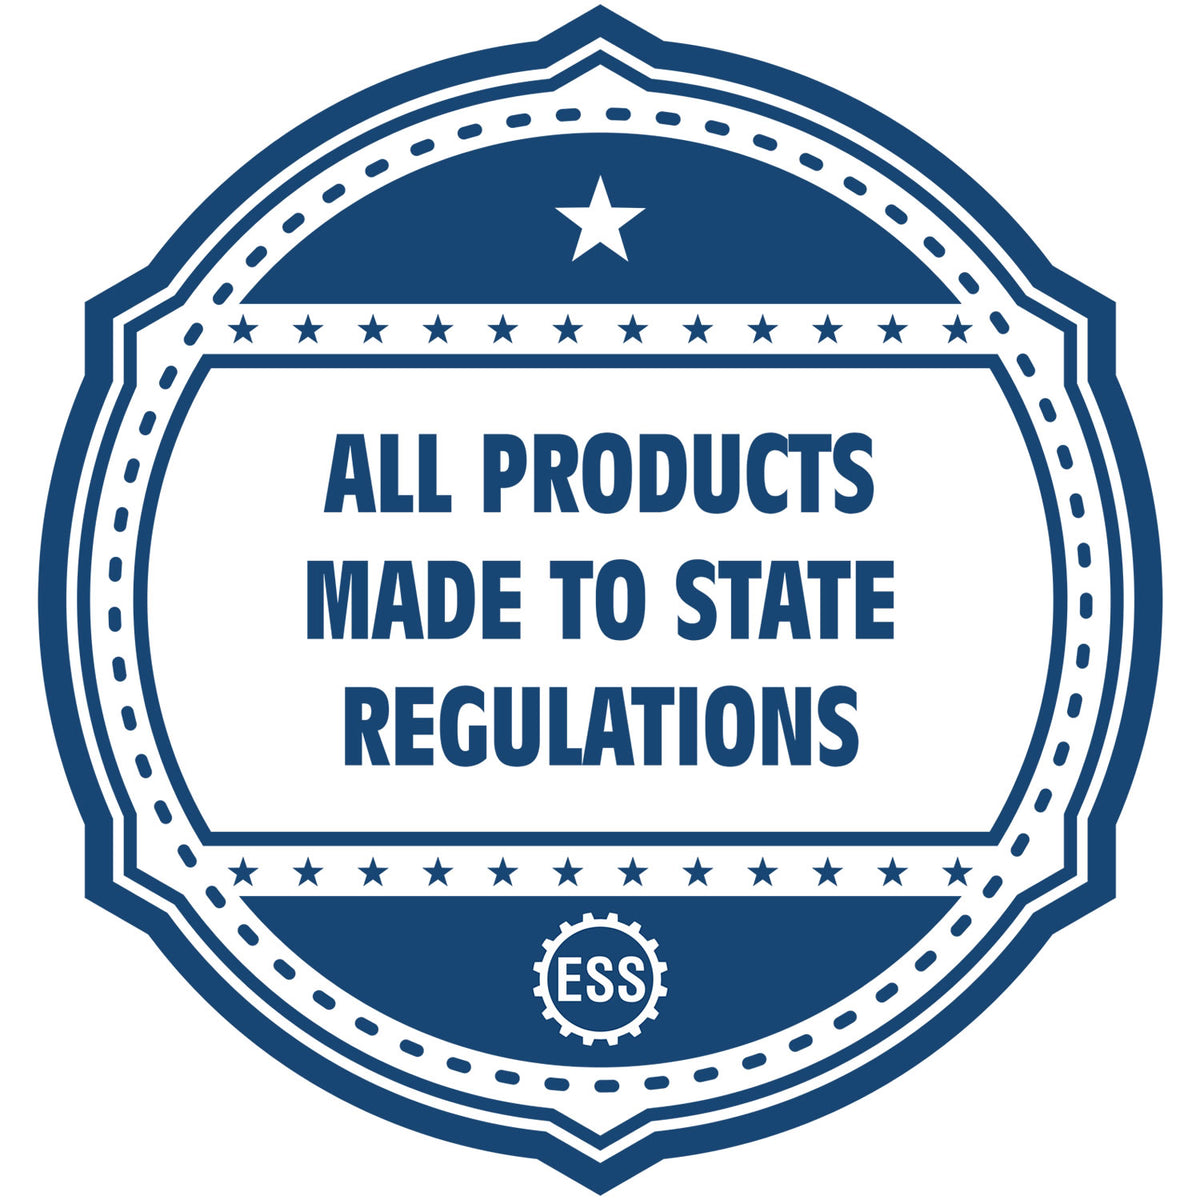 An icon or badge element for the Self-Inking New Jersey PE Stamp showing that this product is made in compliance with state regulations.